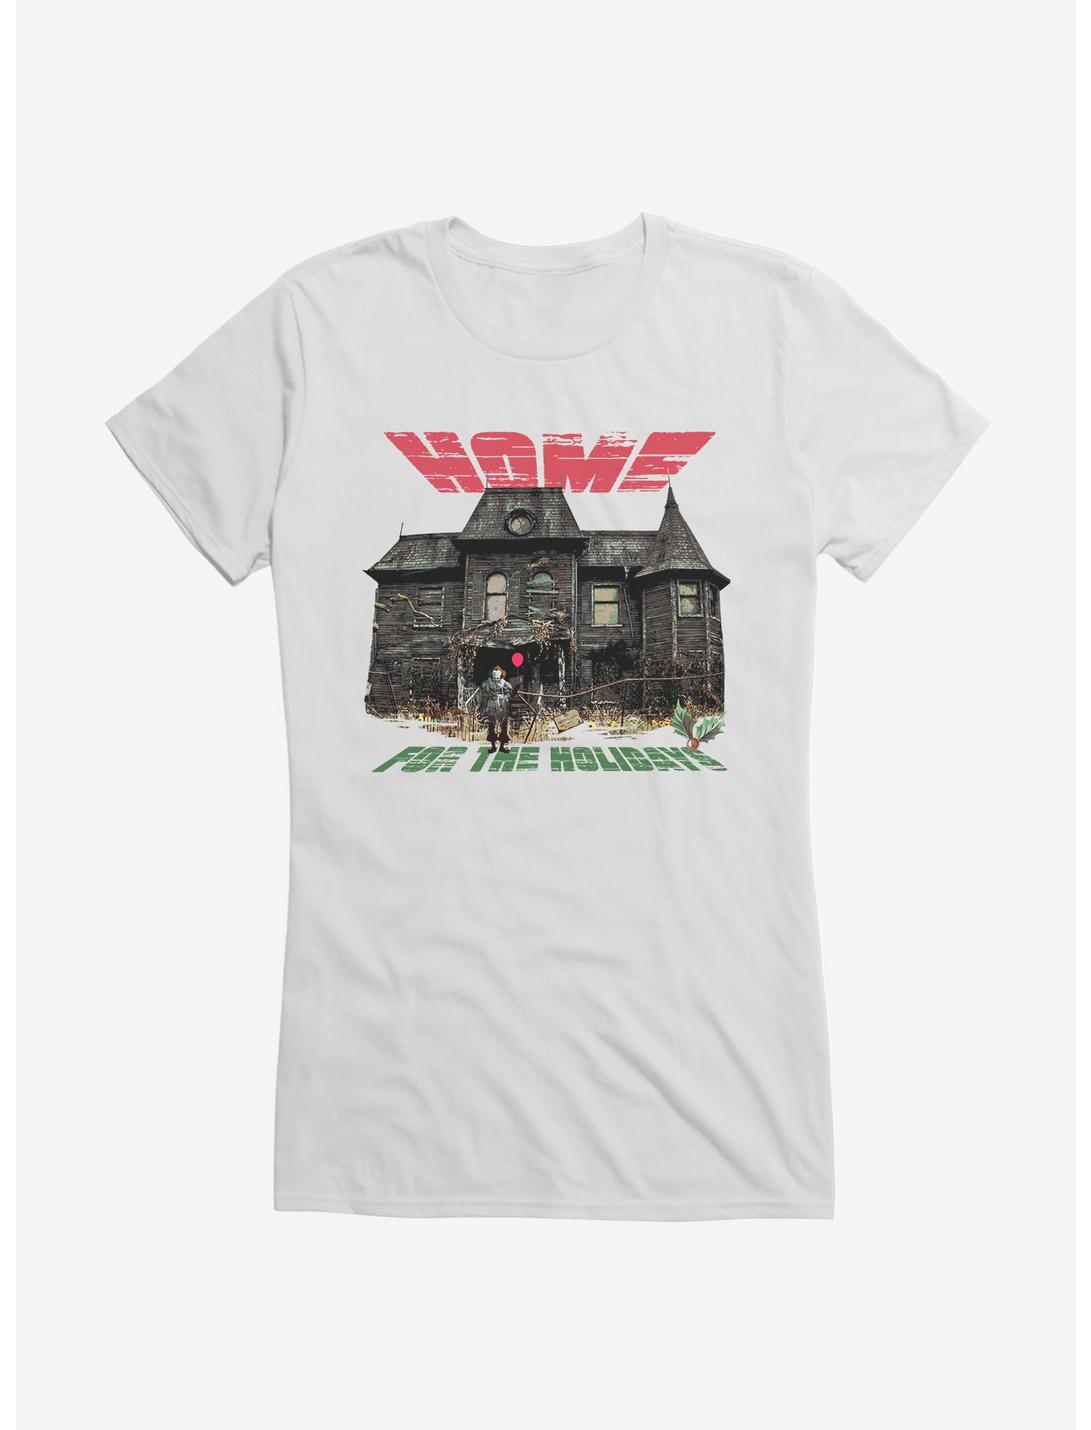 IT Home For The Holidays Girls T-Shirt, WHITE, hi-res